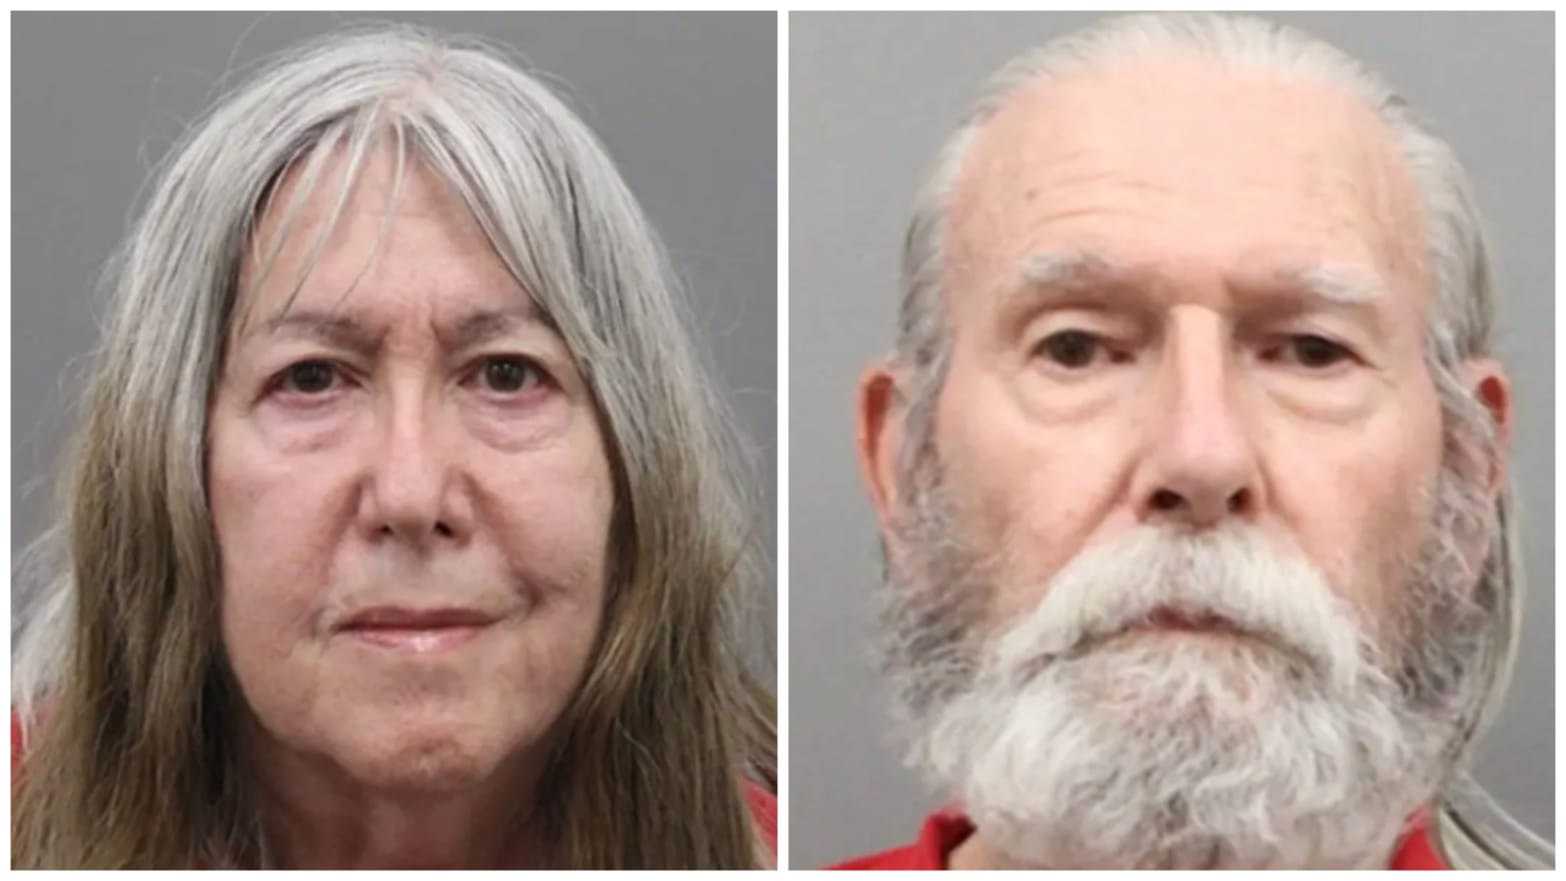 Side-by-side mugshots of Carolyn Luke and Timothy Miller.